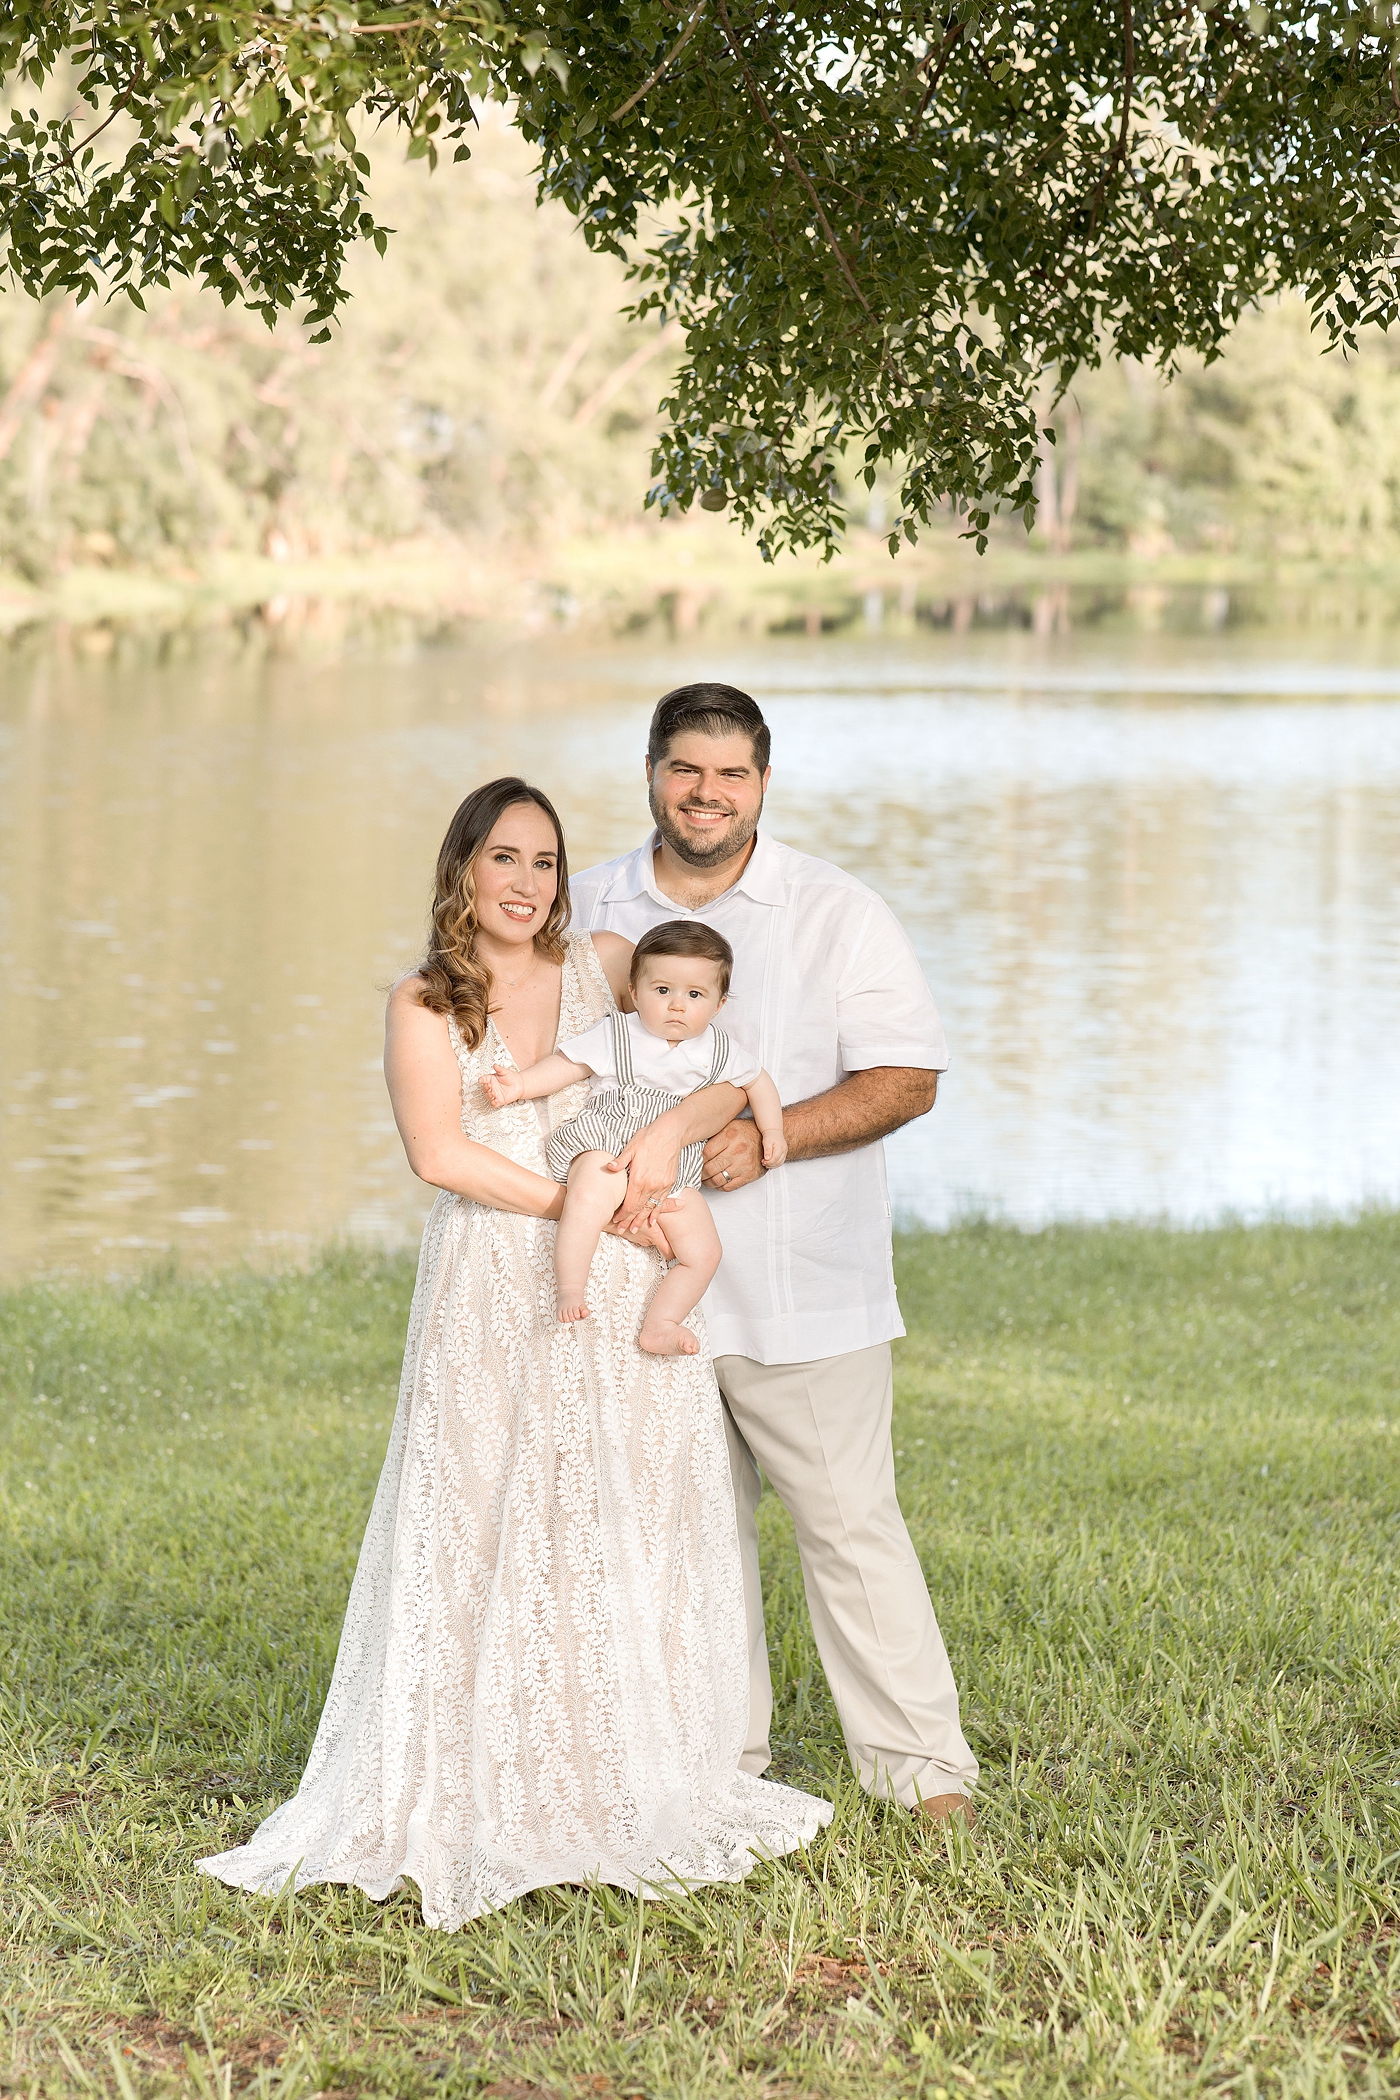 Family of three poses with young son during Miami Children Photography session. Photo by Ivanna Vidal Photography.